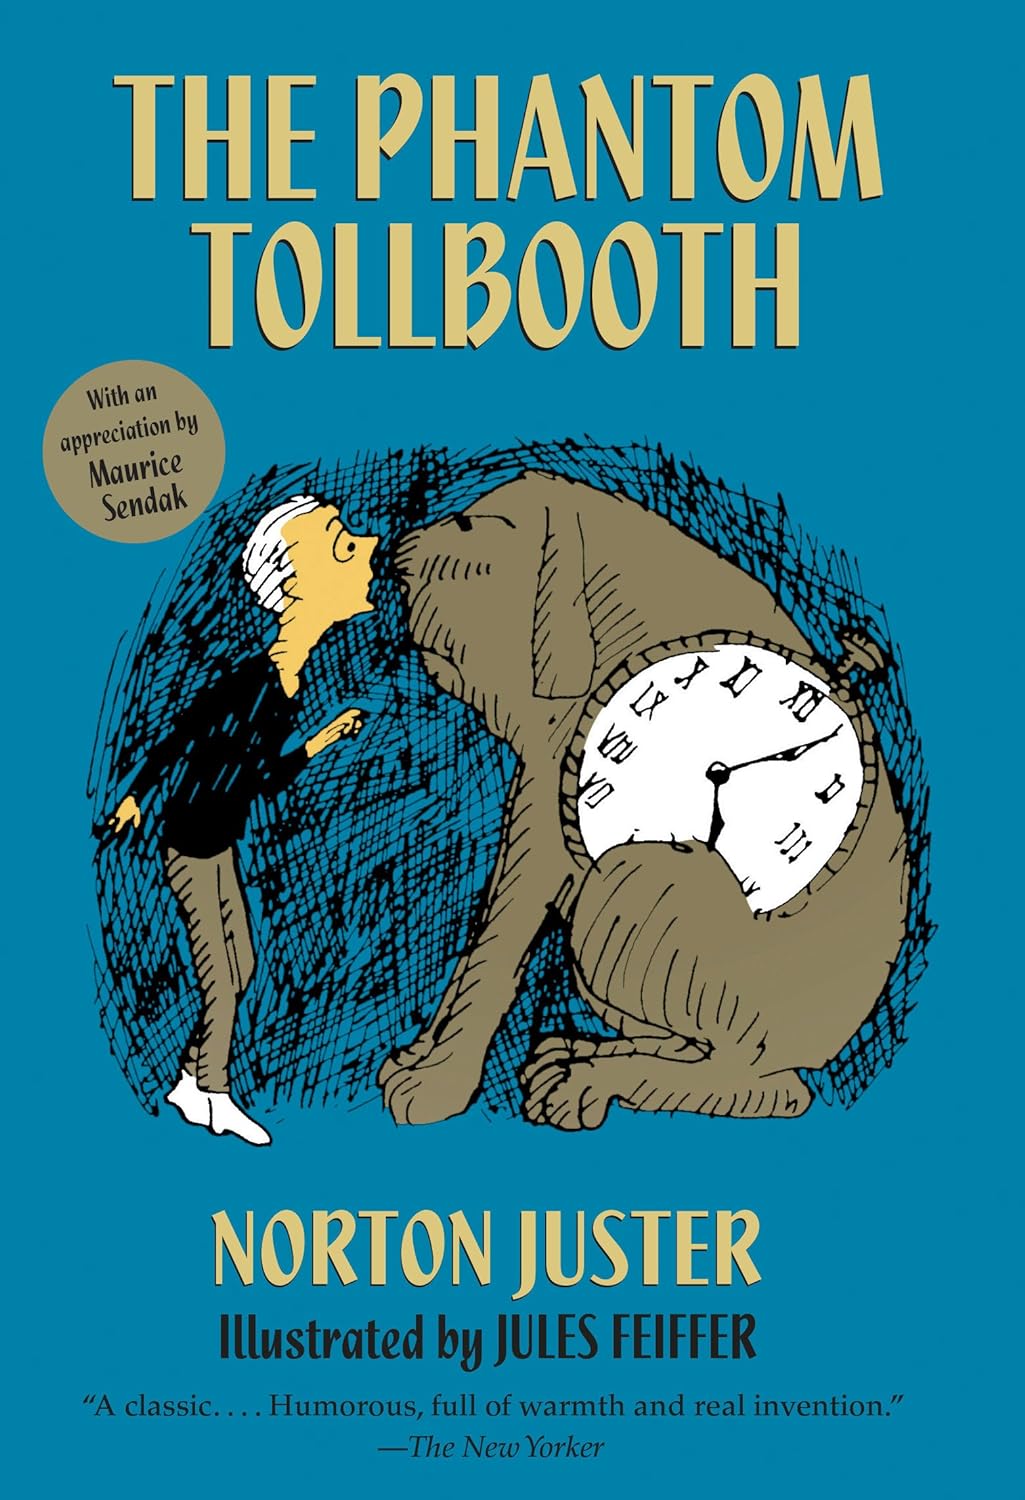 The cover of "The Phantom Tollbooth" featuring a boy looking at a big dog with a clock on its side.